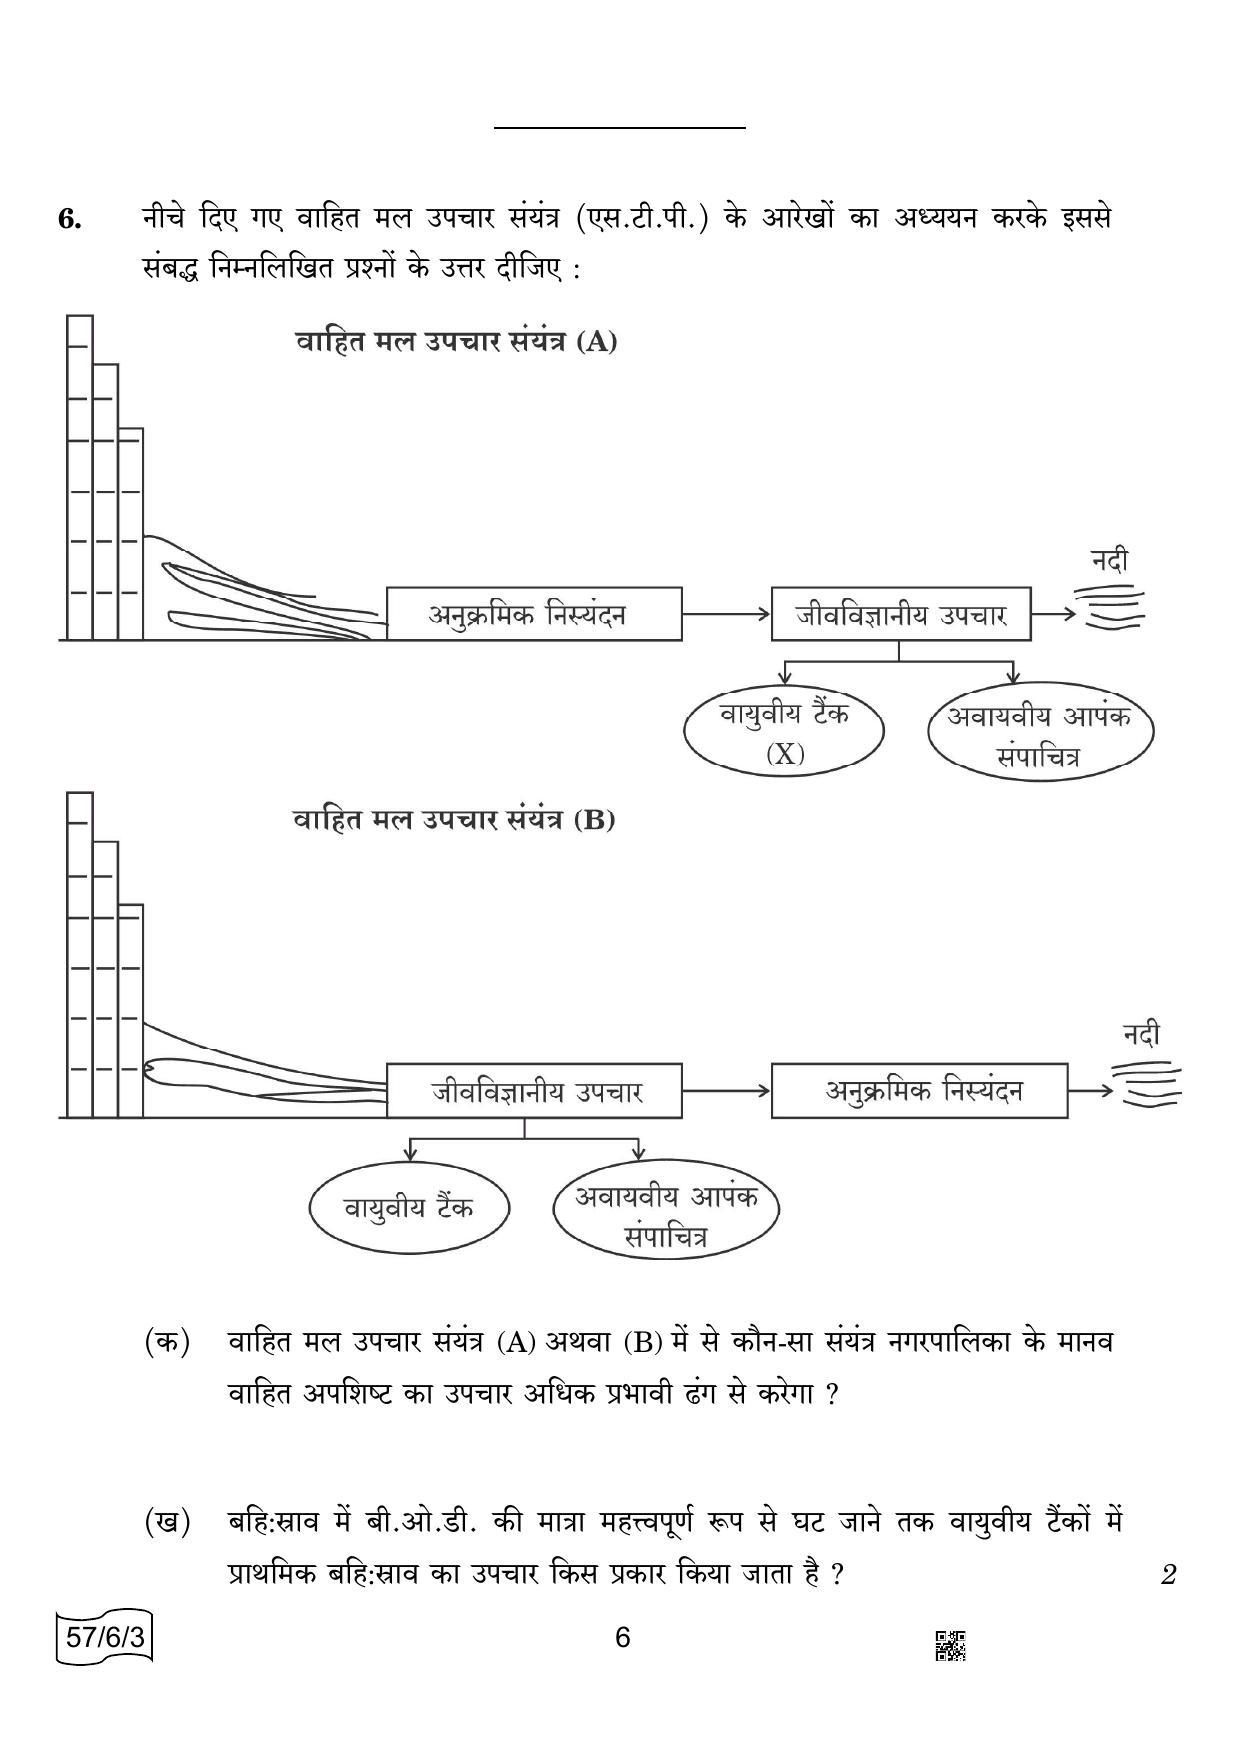 CBSE Class 12 57-6-3 BIOLOGY 2022 Compartment Question Paper - Page 6